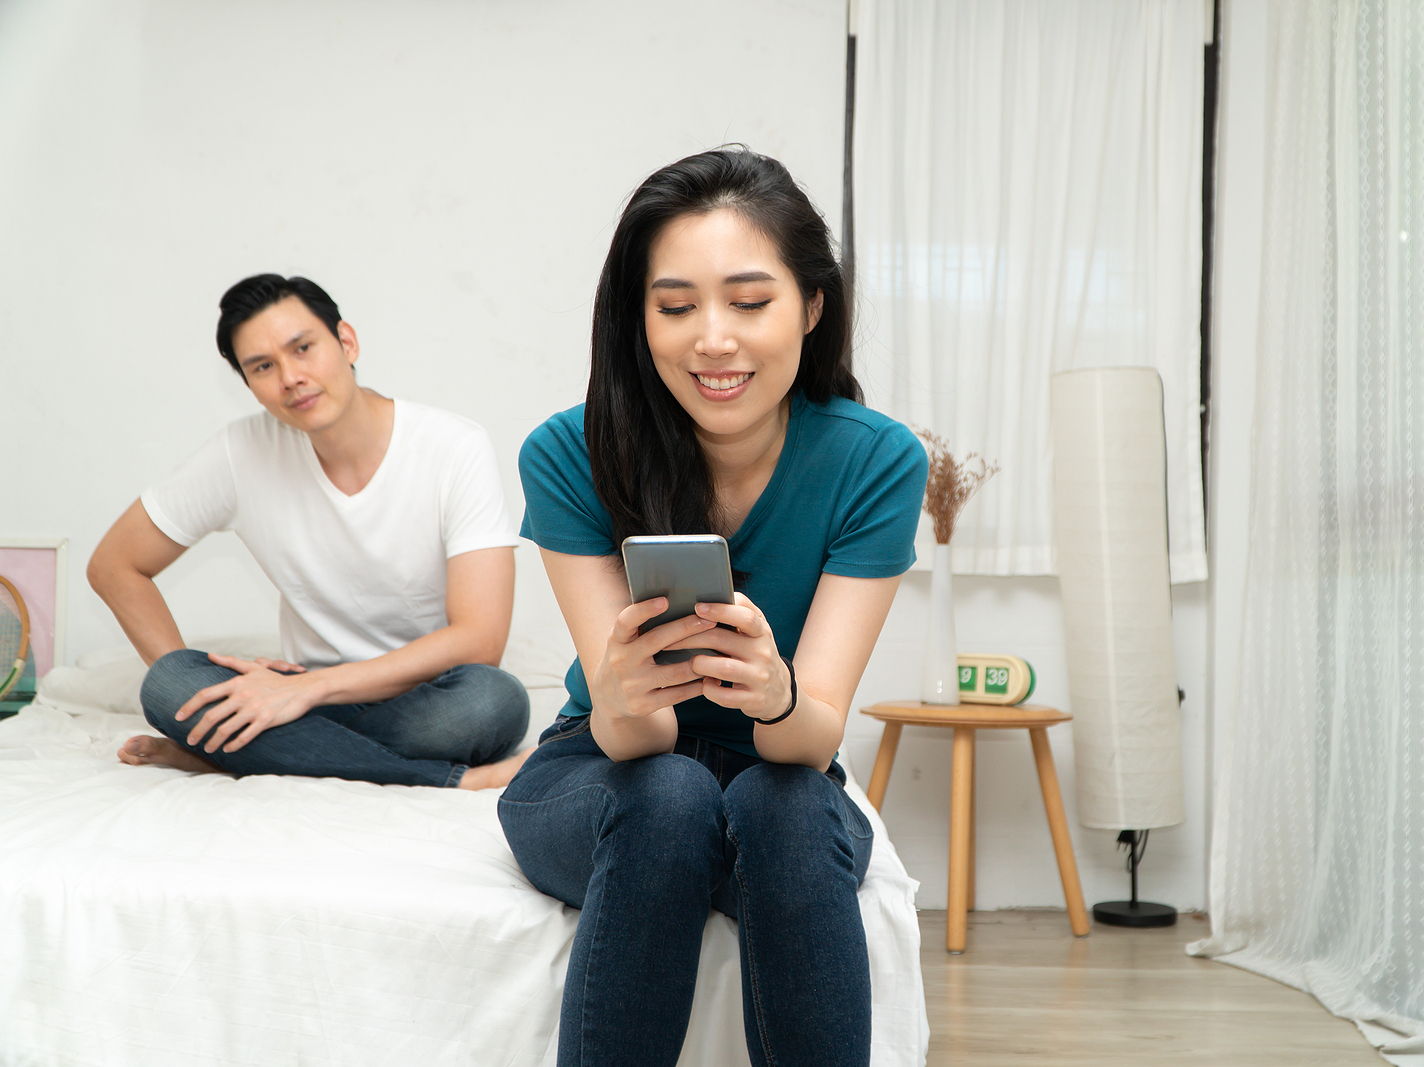 An asian couple sits in bed. The man looks suspiciously at his girlfriend as she looks on her phone smiling.